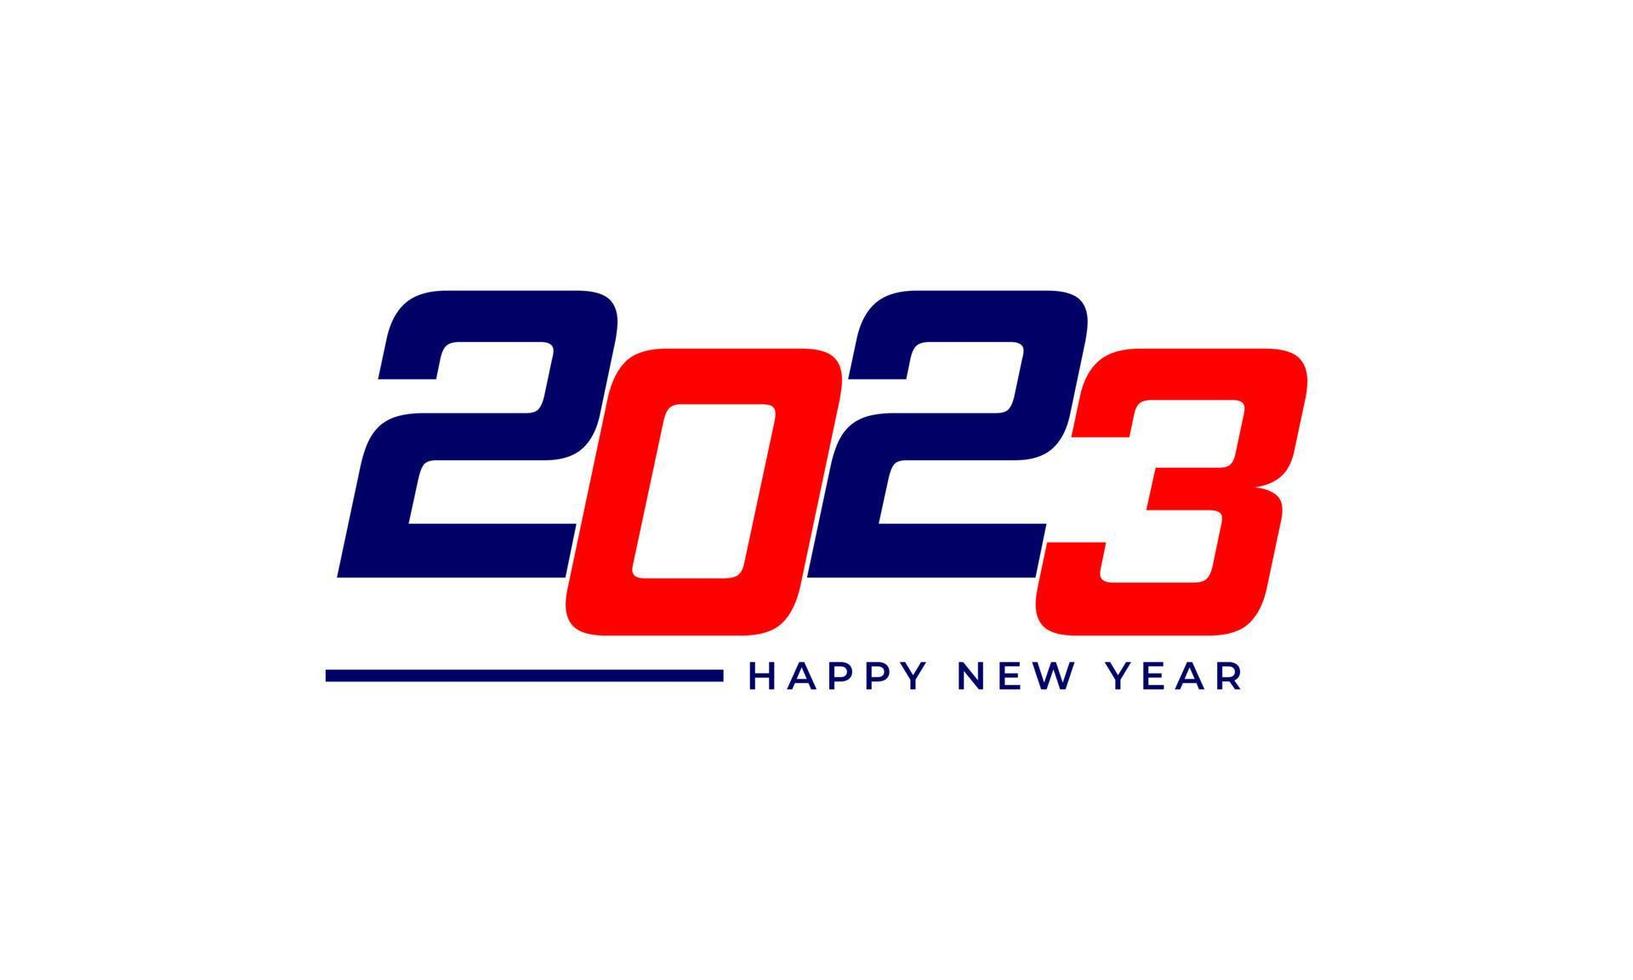 Happy New Year 2023. American style on white background isolated vector